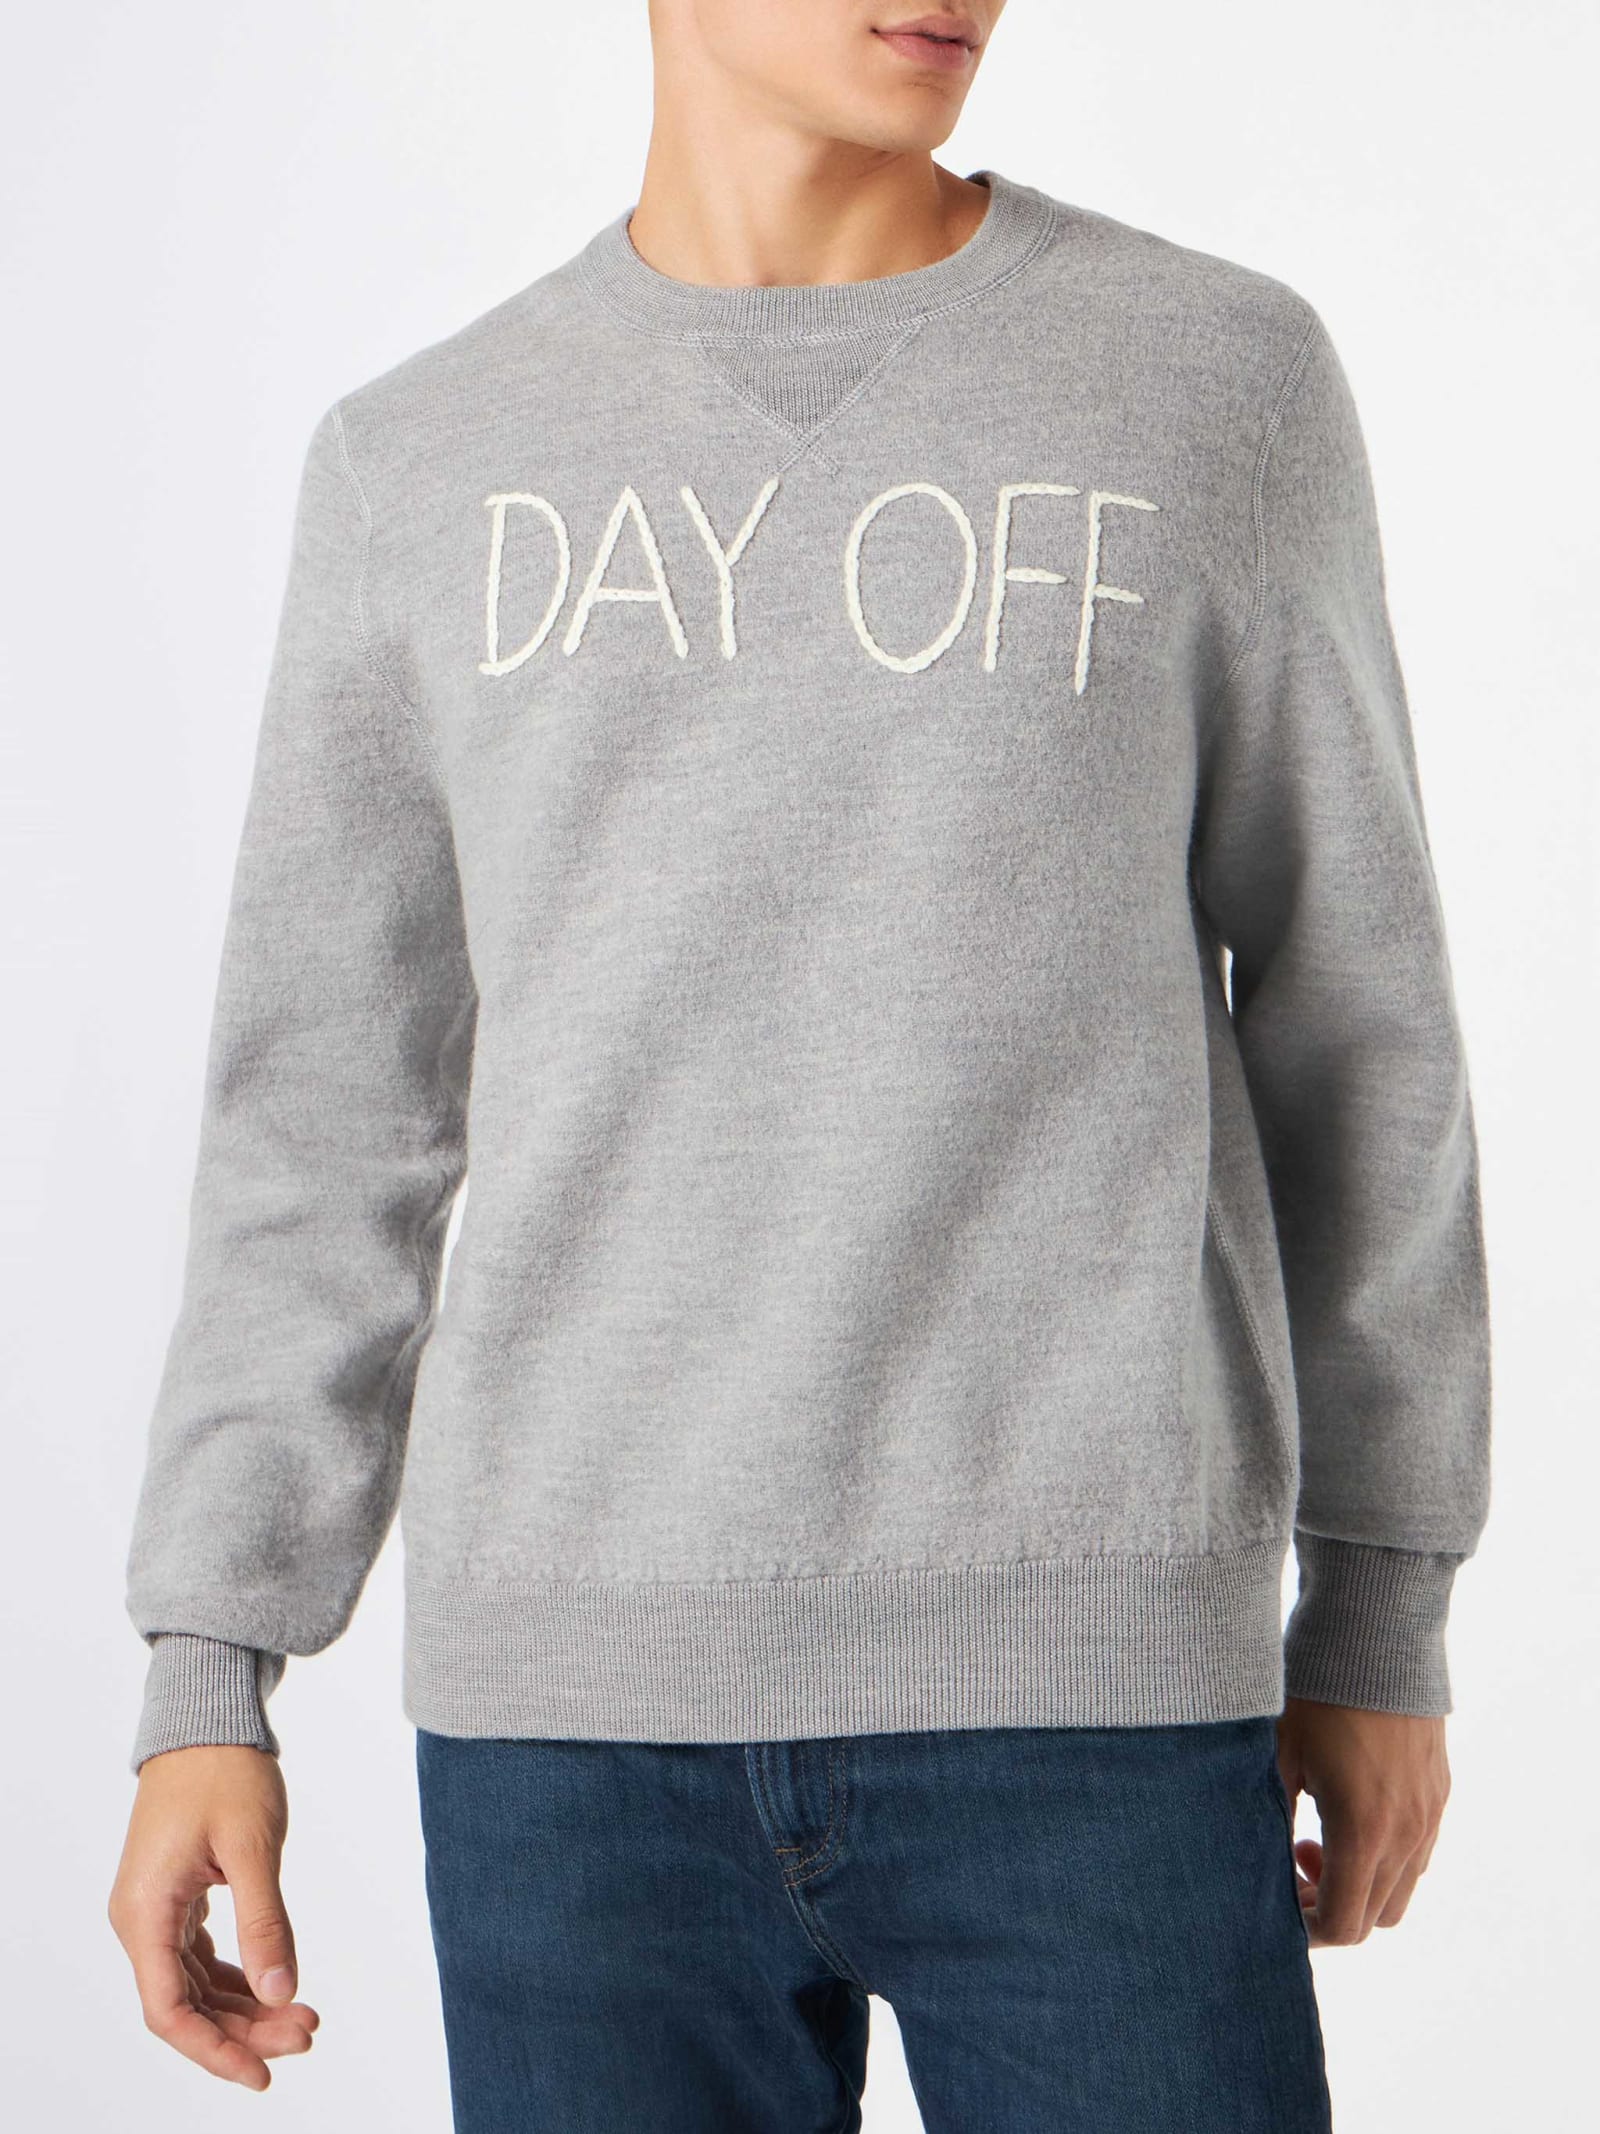 MC2 Saint Barth Man Crewneck Knitted Sweater With Day Off Embroidery